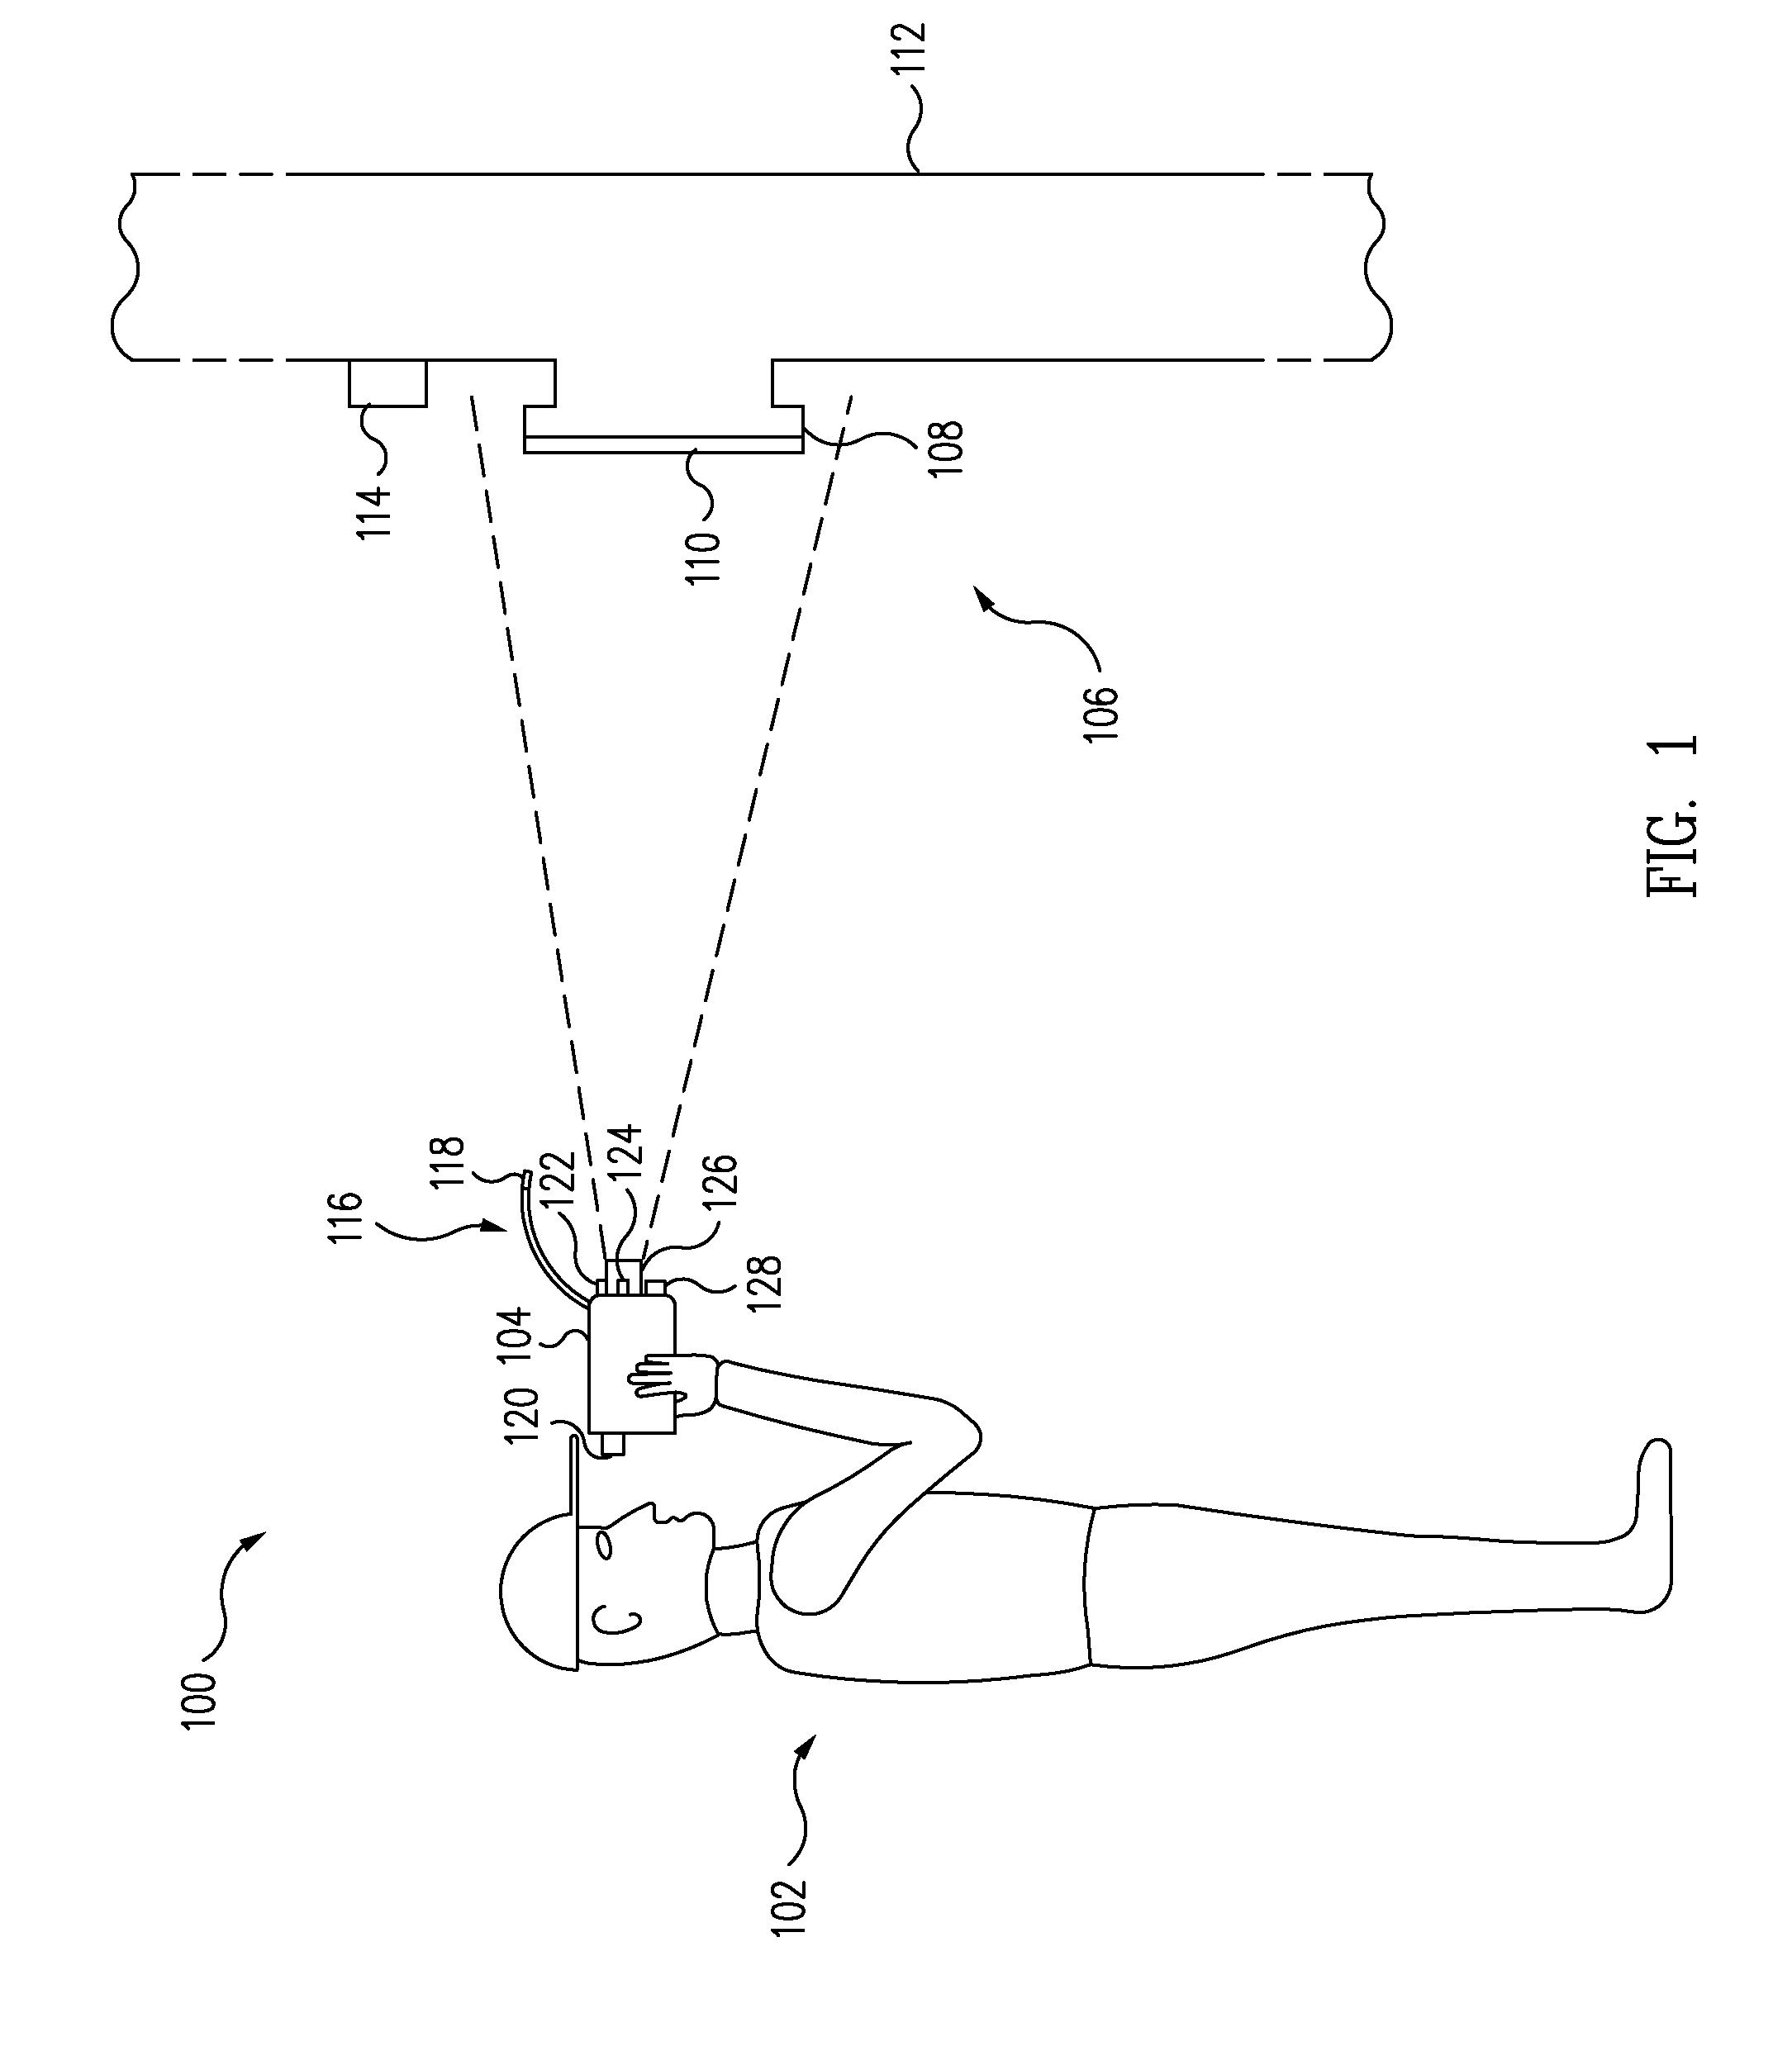 Portable multi-function inspection systems and methods